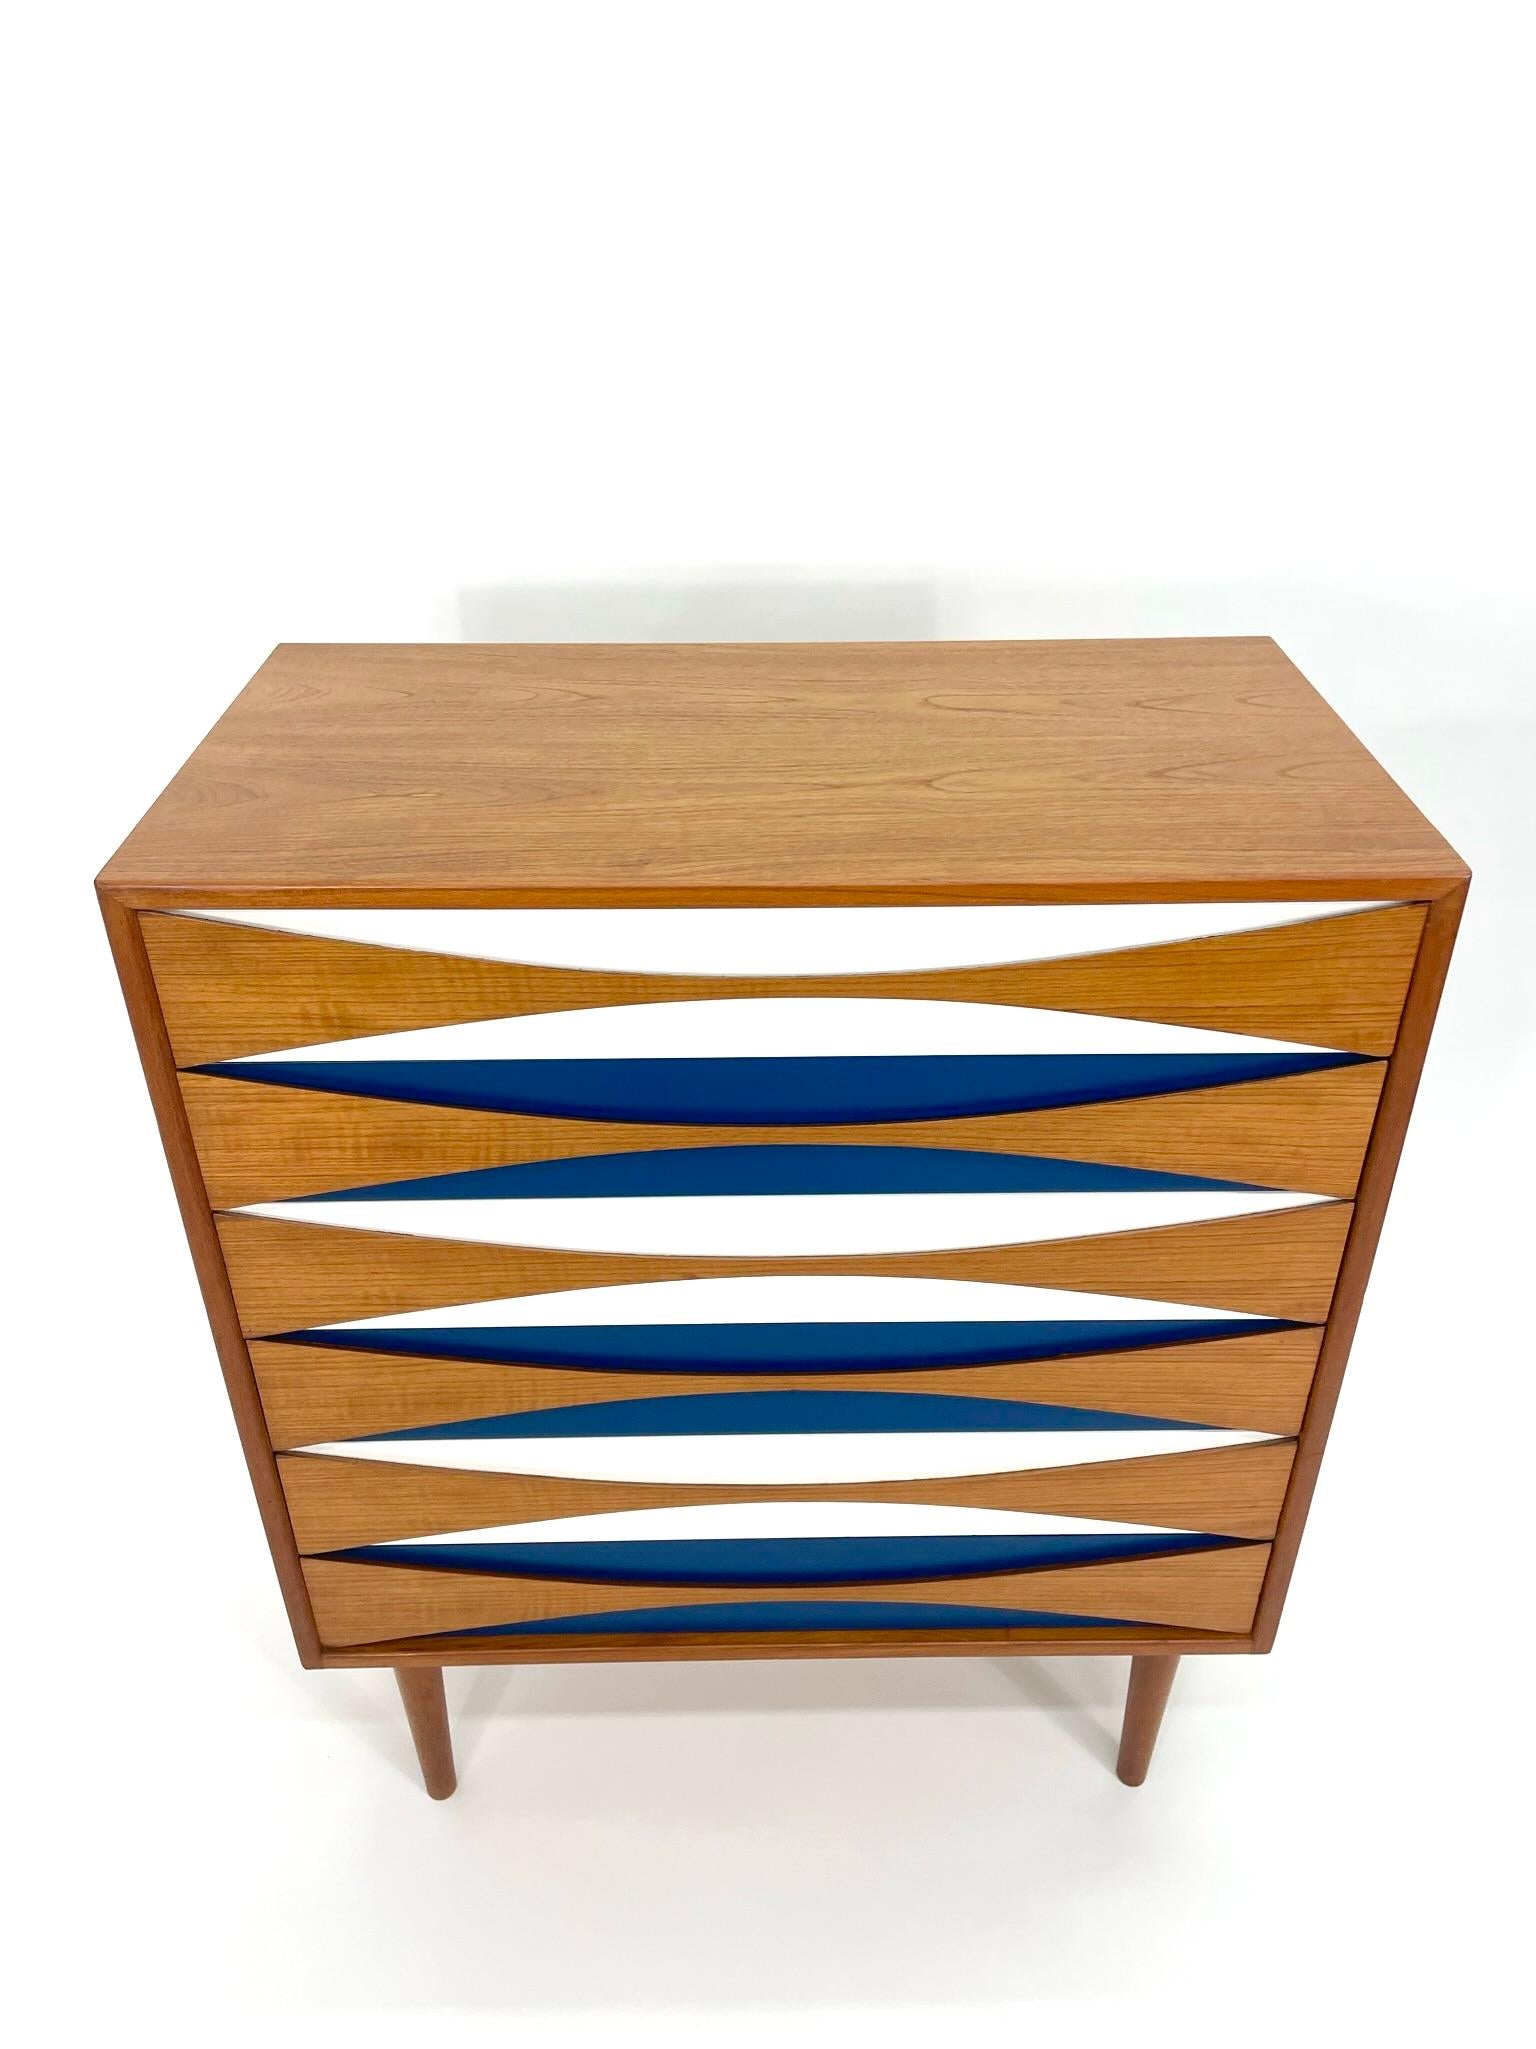 Niels Clausen Teak and Oak Tallboy Dresser with Blue and White 2